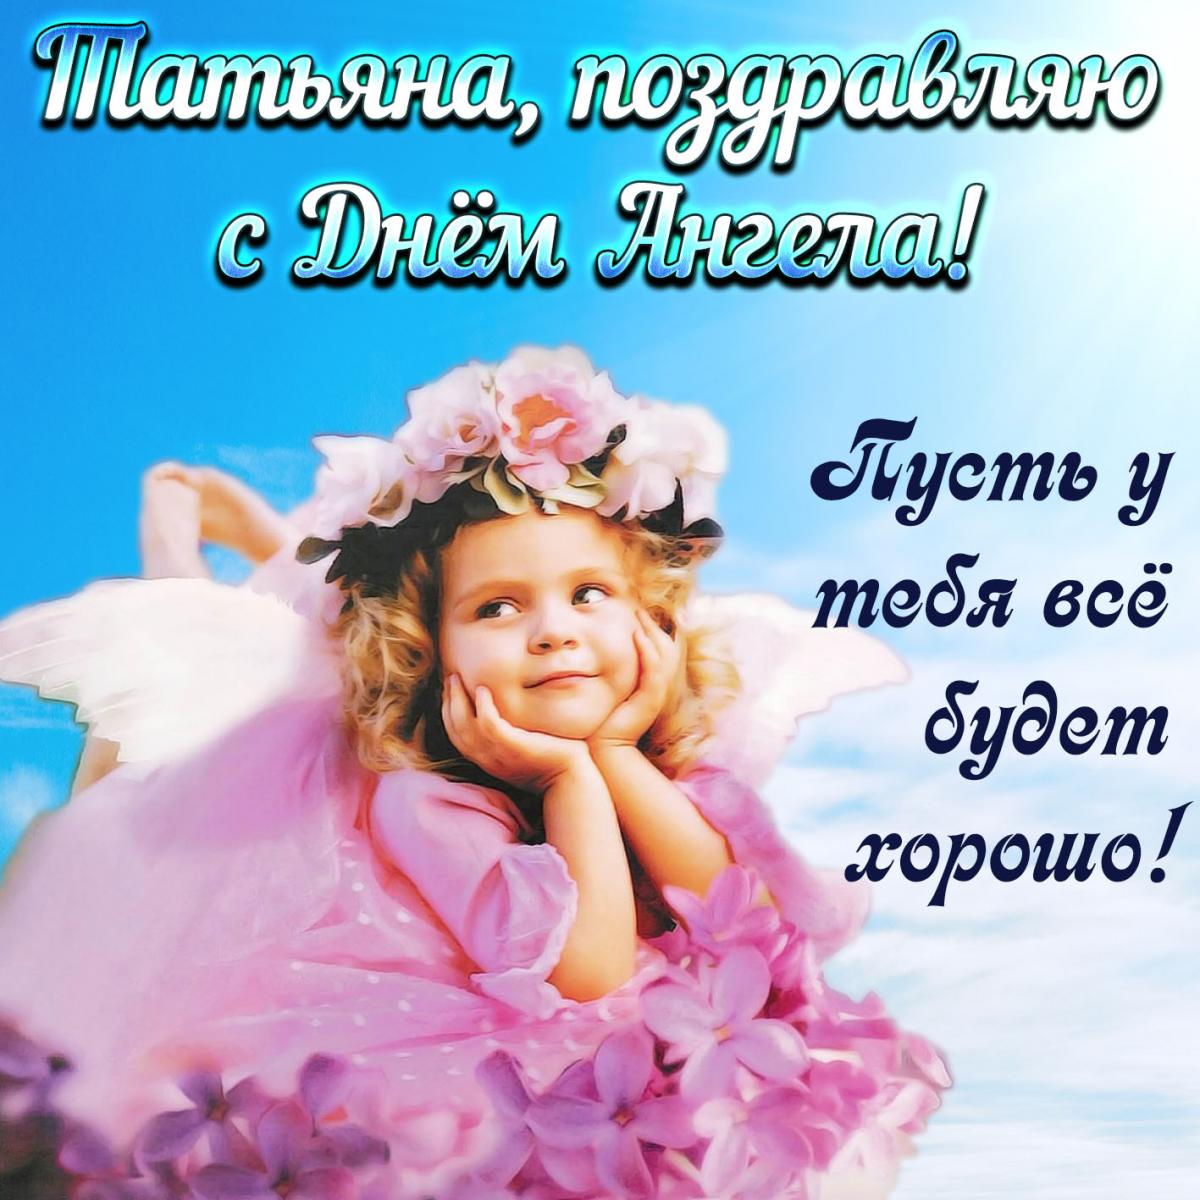 Happy Angel Tatyana's Day 2022 pictures / photos bonnycards.ru